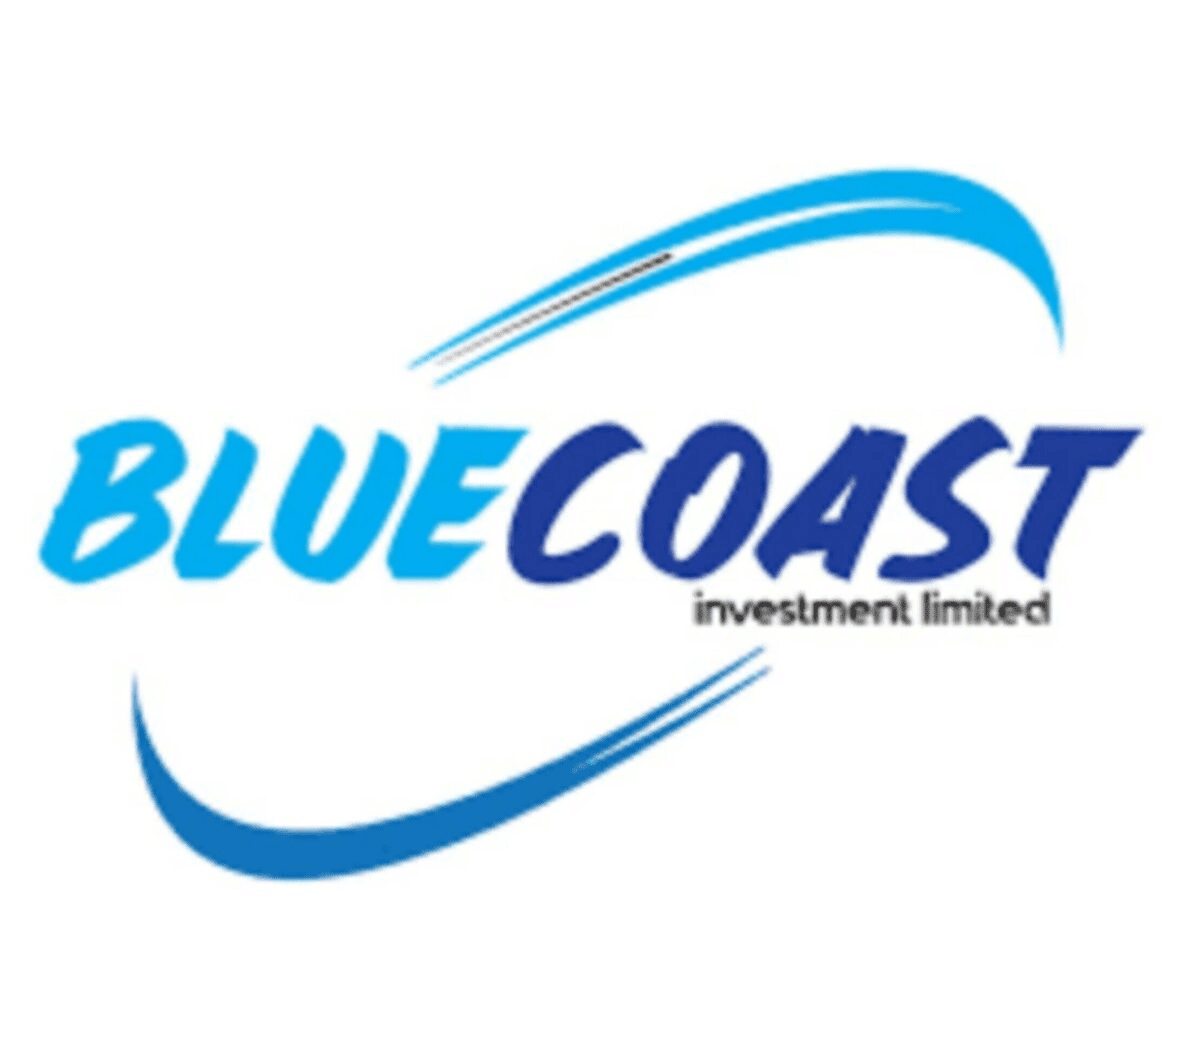 New Job Opportunities at Bluecoast Investment Limited Tanzania 2022, Blue Coast Investment Limited Jobs Opportunities, Blue Coast Investment Limited Vacancies, Nafasi za kazi Tanzania, Nafasi Za Kazi Blue Coast Investment Limited